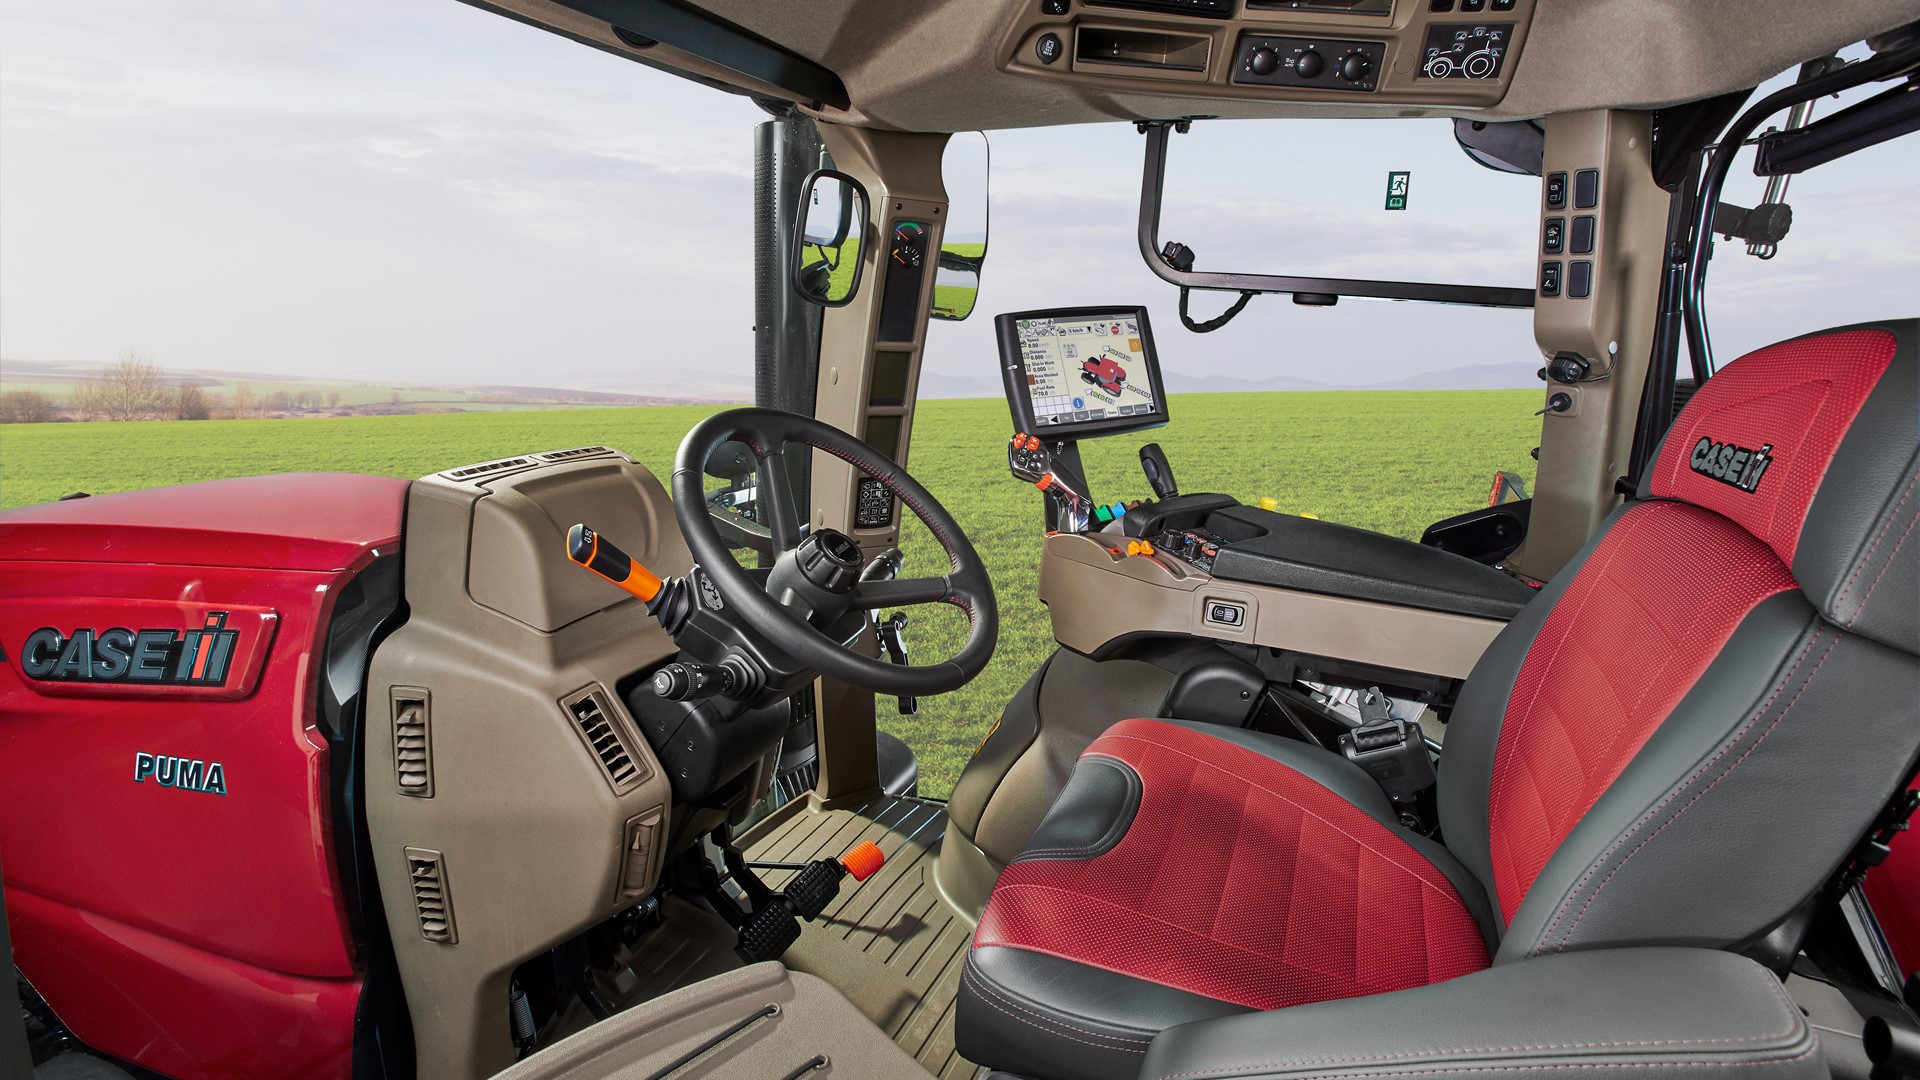 Model Year 2022 Maxxum® and Puma® series tractors offer productivity-boosting enhancements